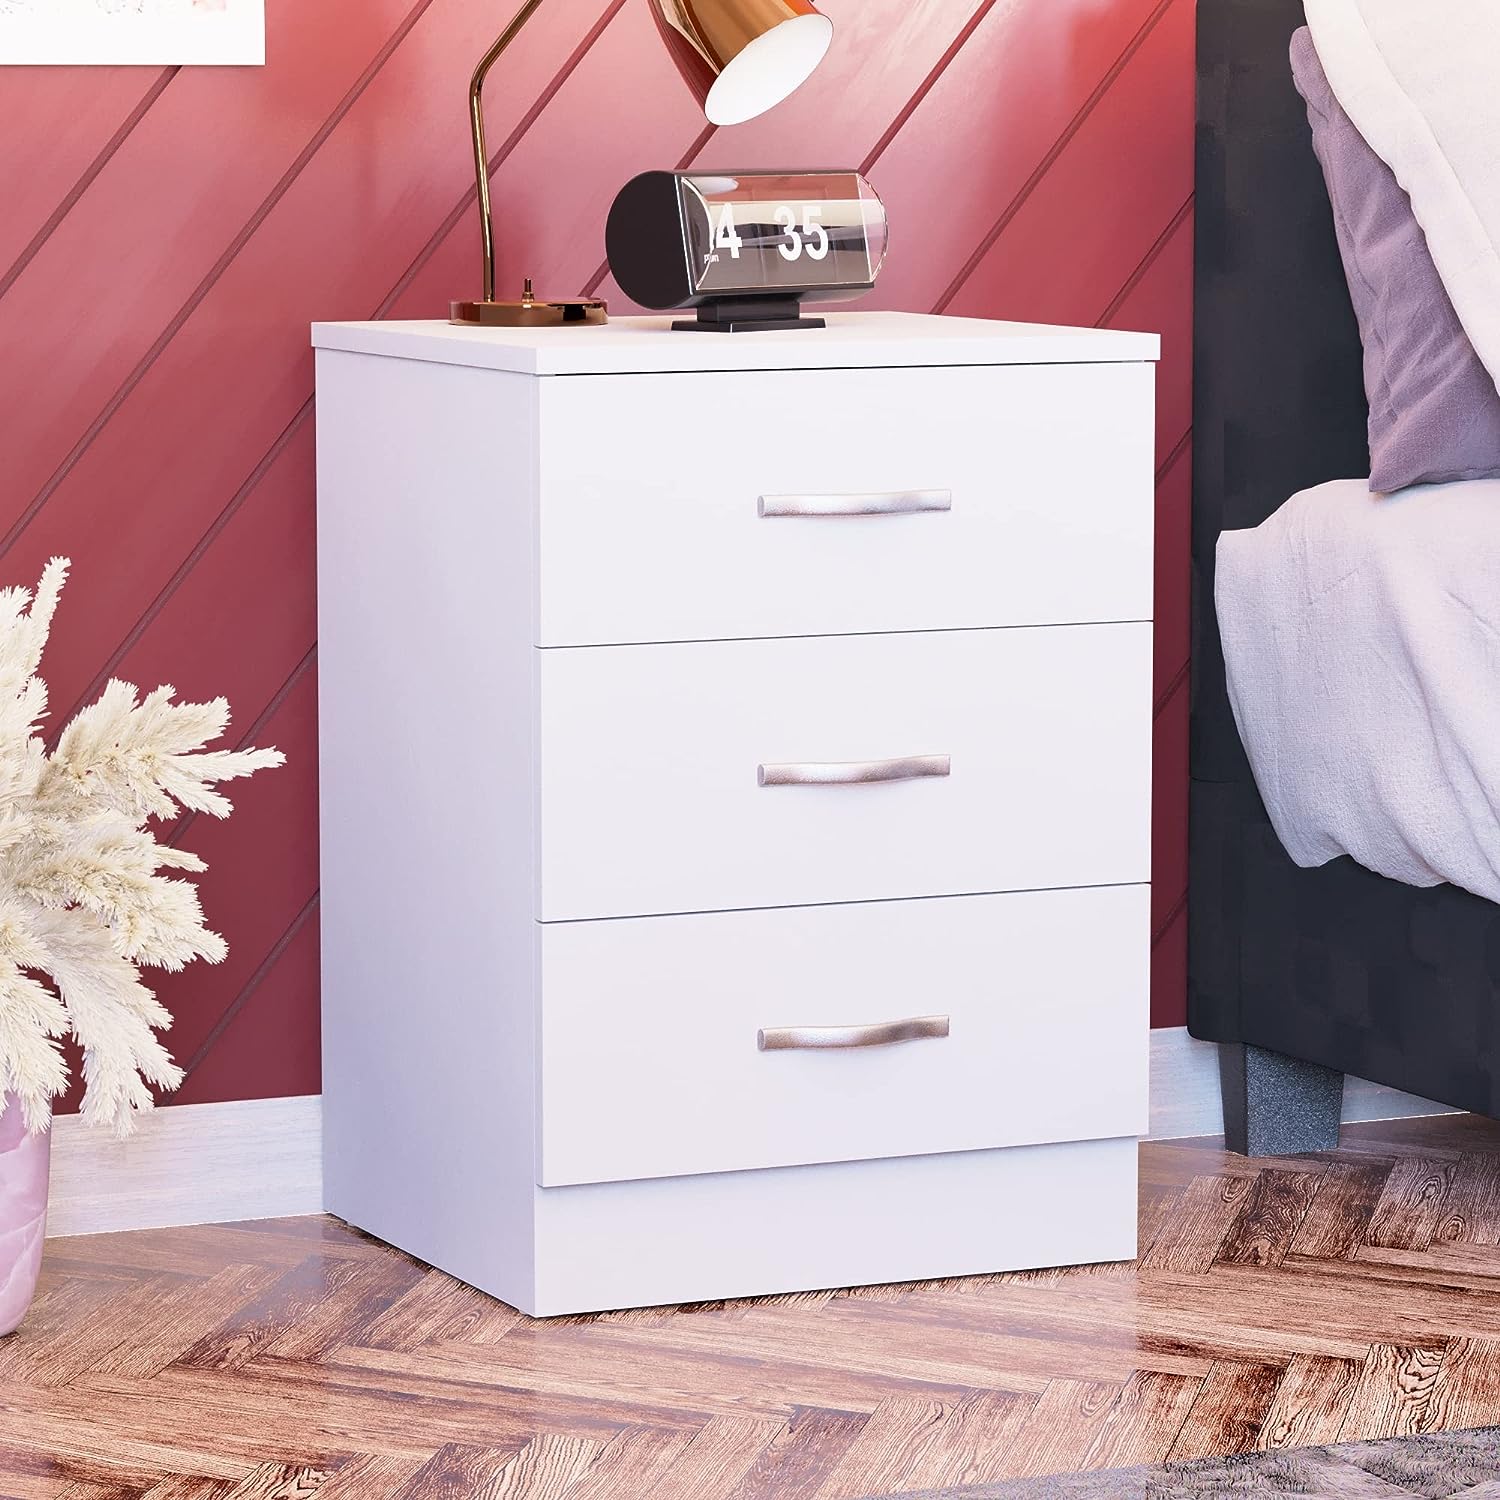 Vida Designs White Bedside Cabinet Chest of Drawers, 3 Drawer With Metal Handles and Runners, Unique Anti-Bowing Drawer Support, Riano Bedroom Furniture